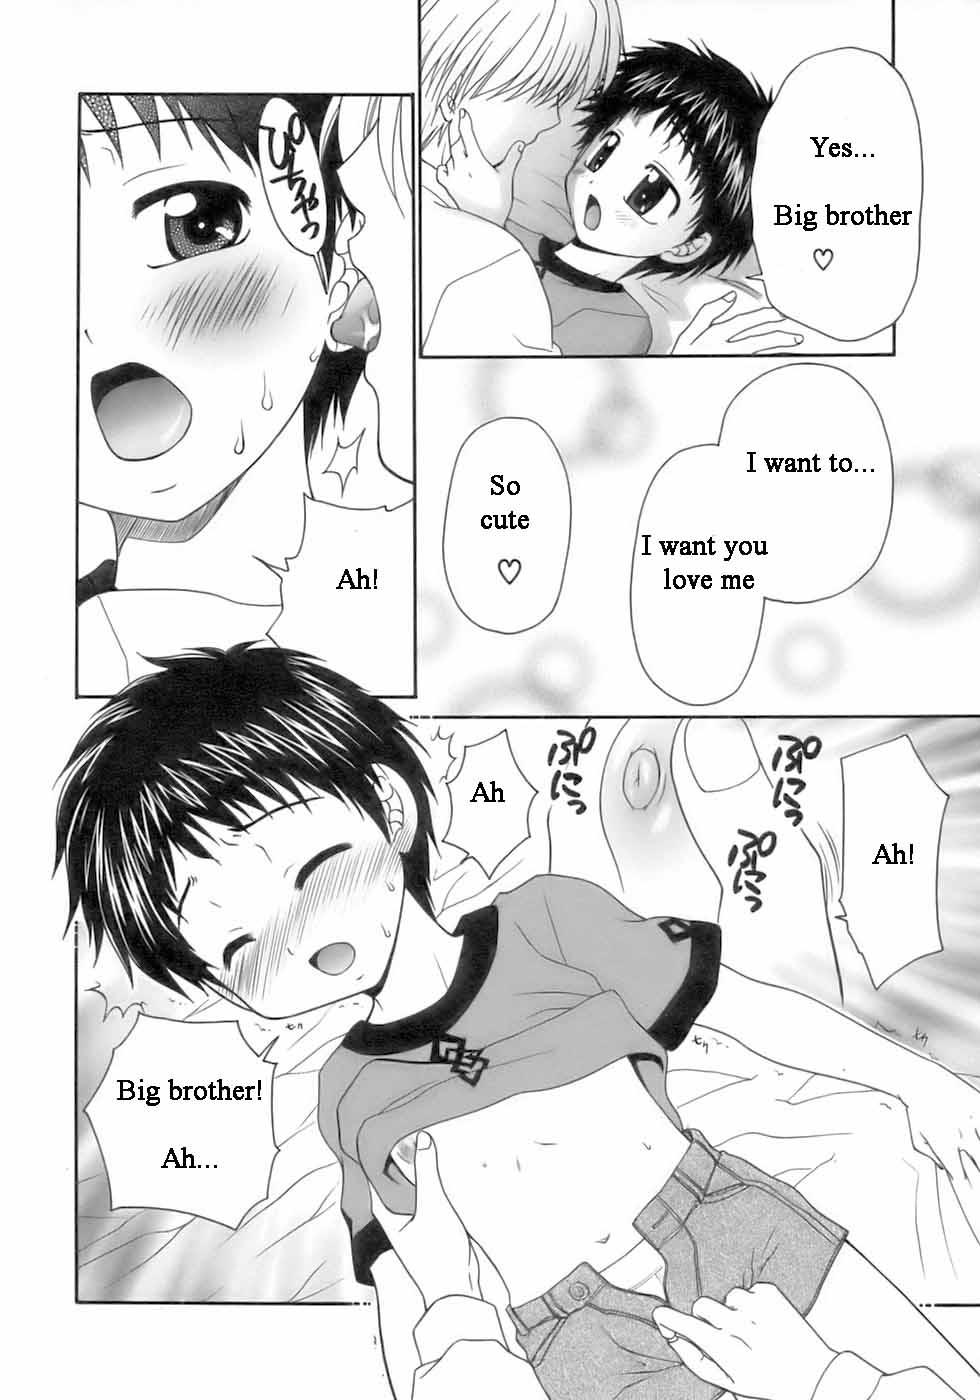 Cute Otouto ga Kita Hi | The Day My Brother Came Weird - Page 7